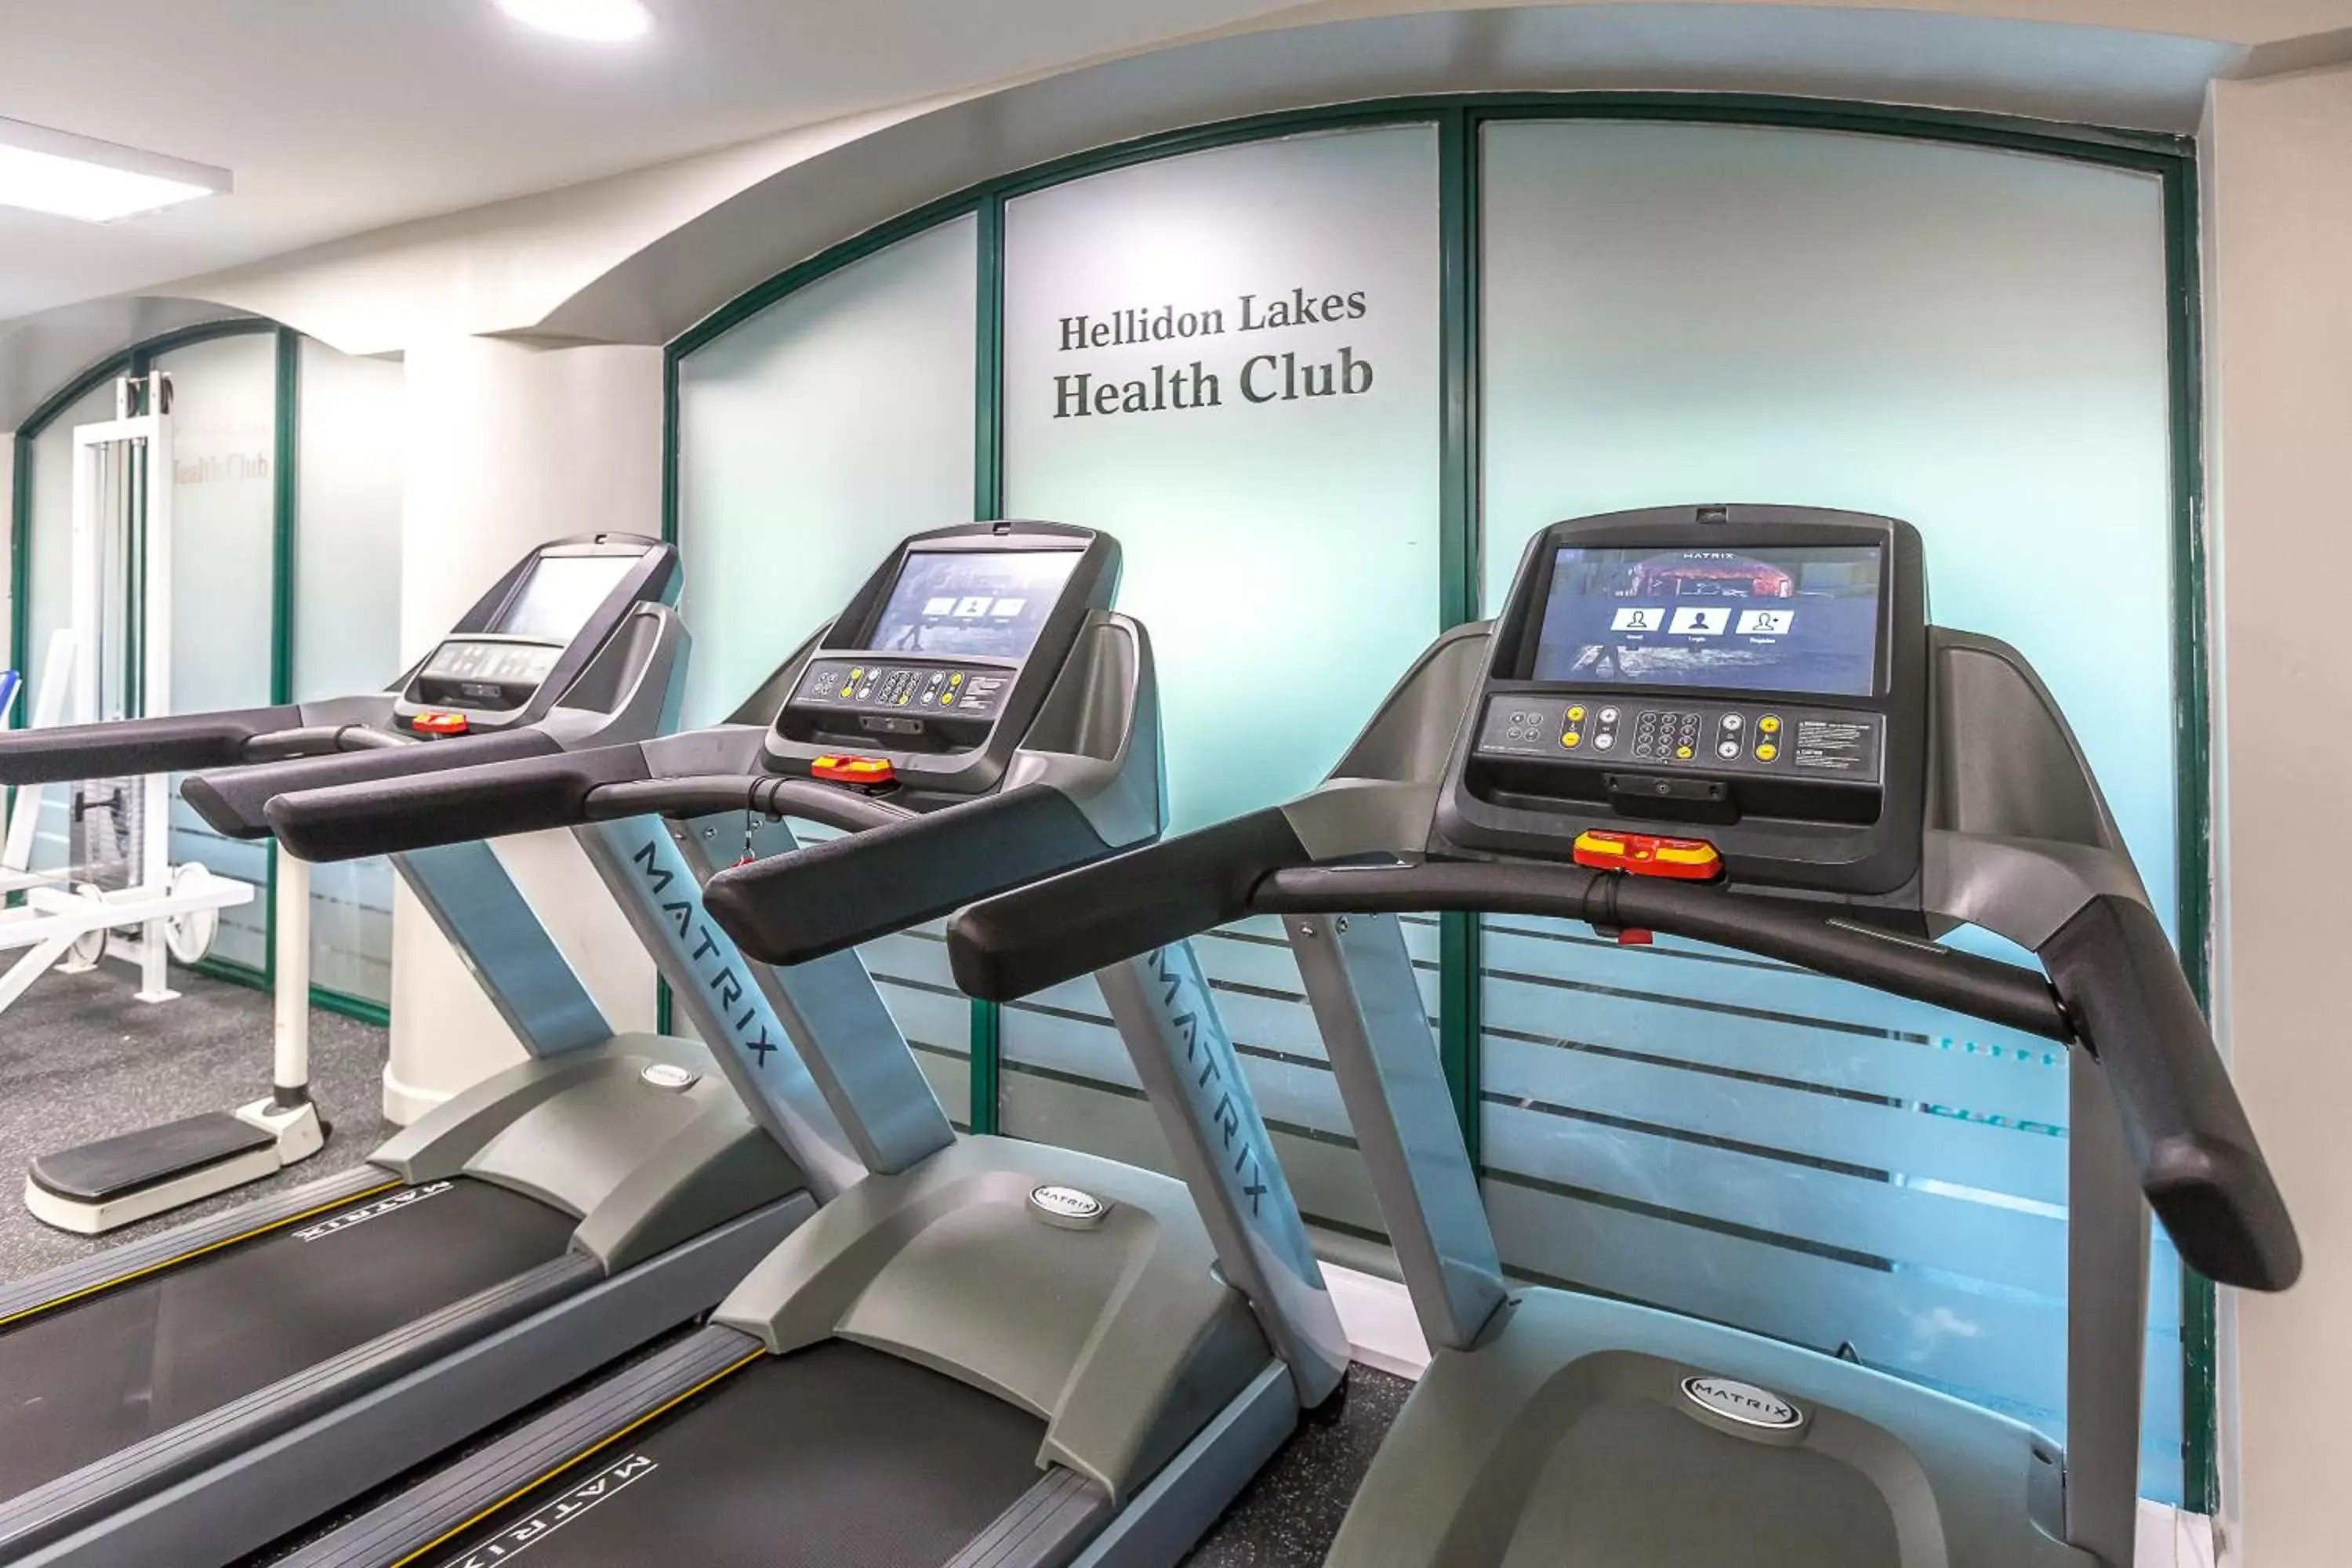 Fitness centre/facilities, Fitness Center/Facilities in Hellidon Lakes Hotel